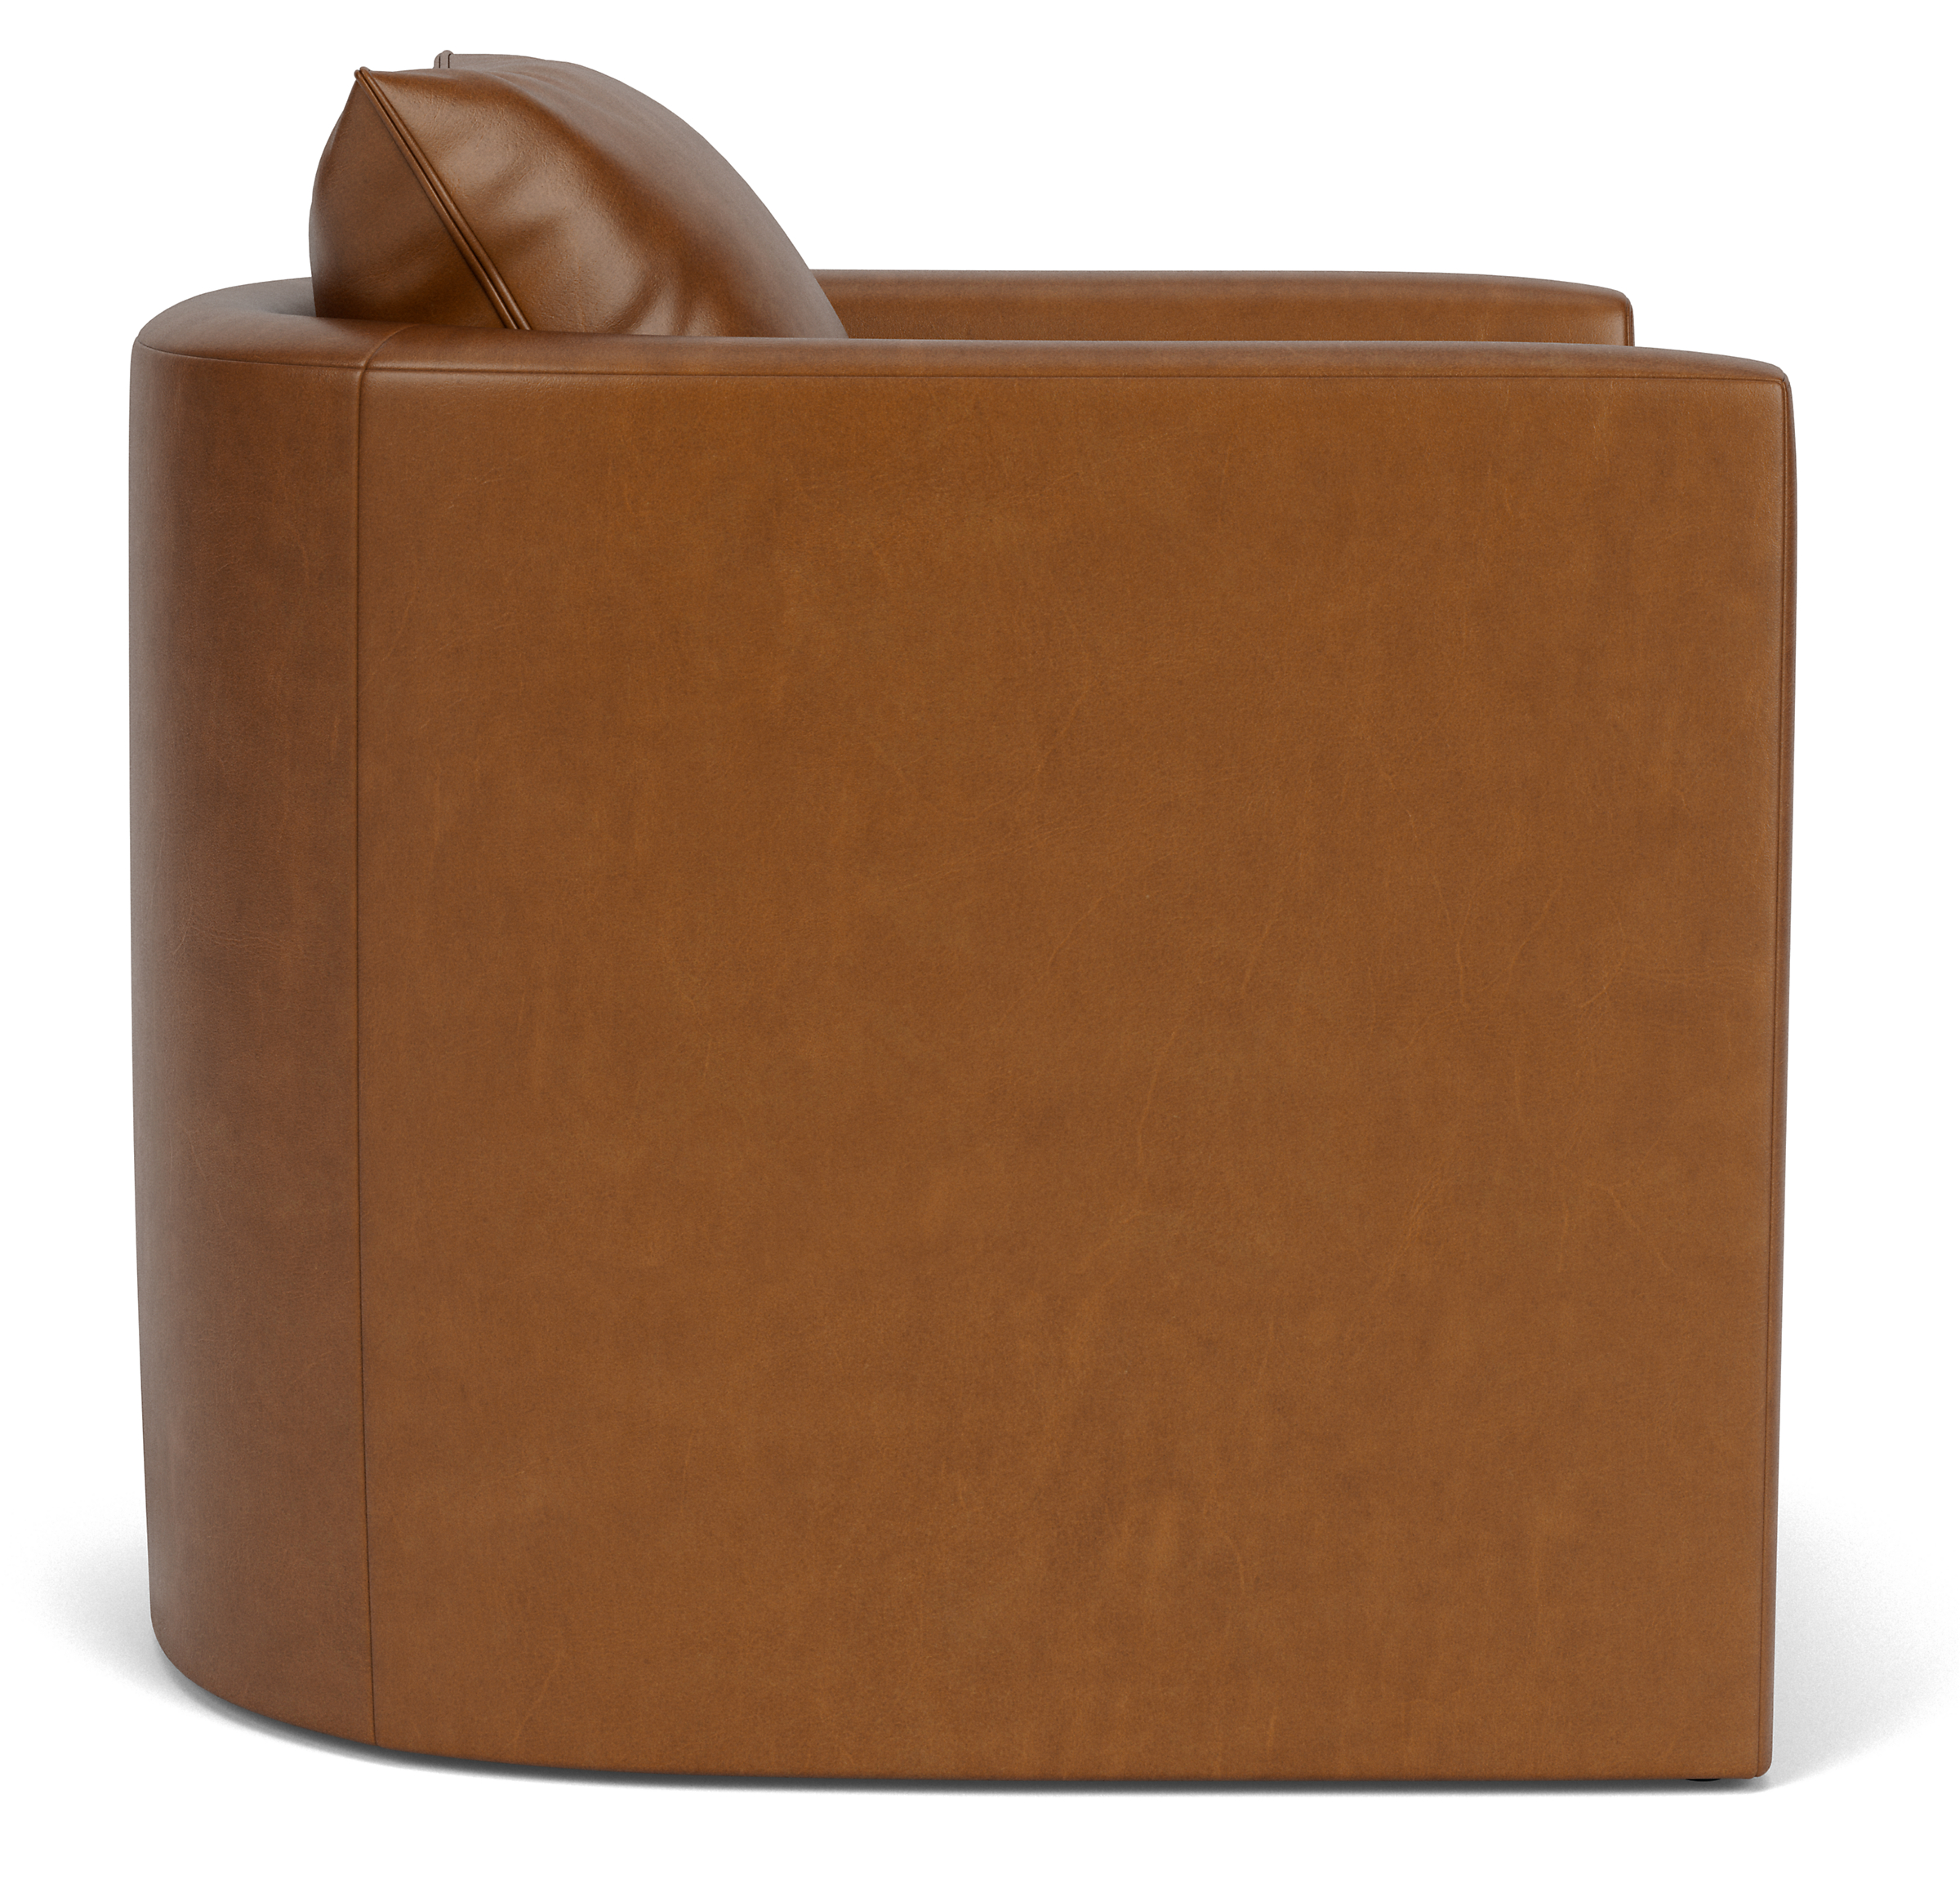 Side view of Silva Chair in Vento Cognac.